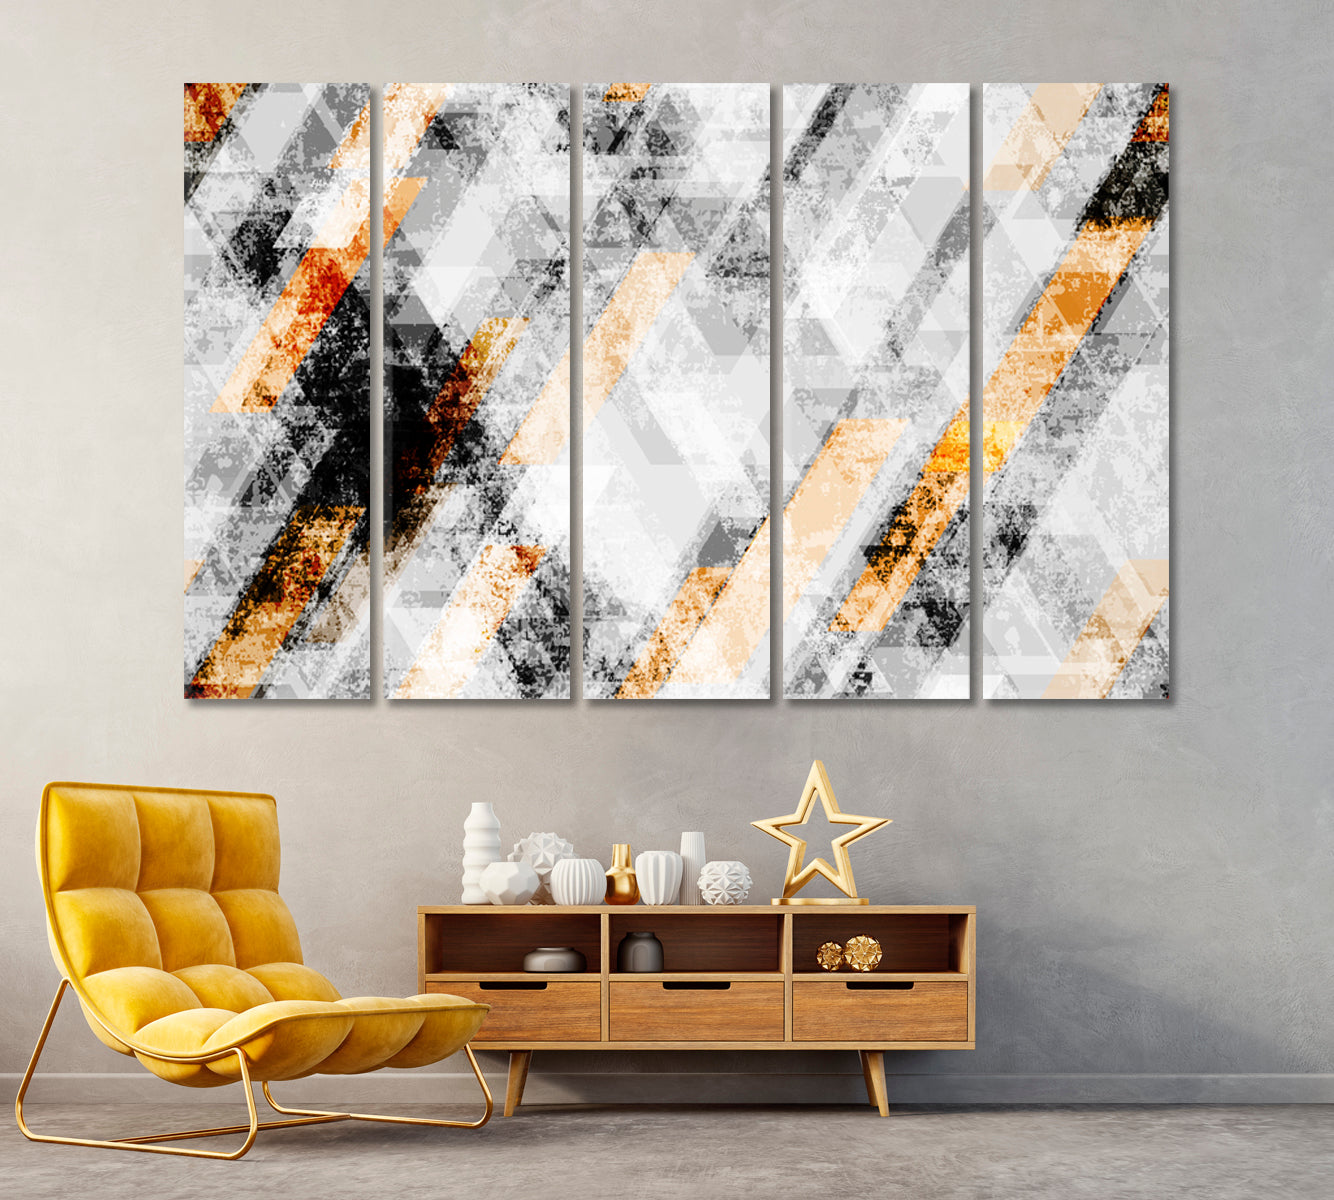 Geometric Abstraction Canvas Print ArtLexy 5 Panels 36"x24" inches 